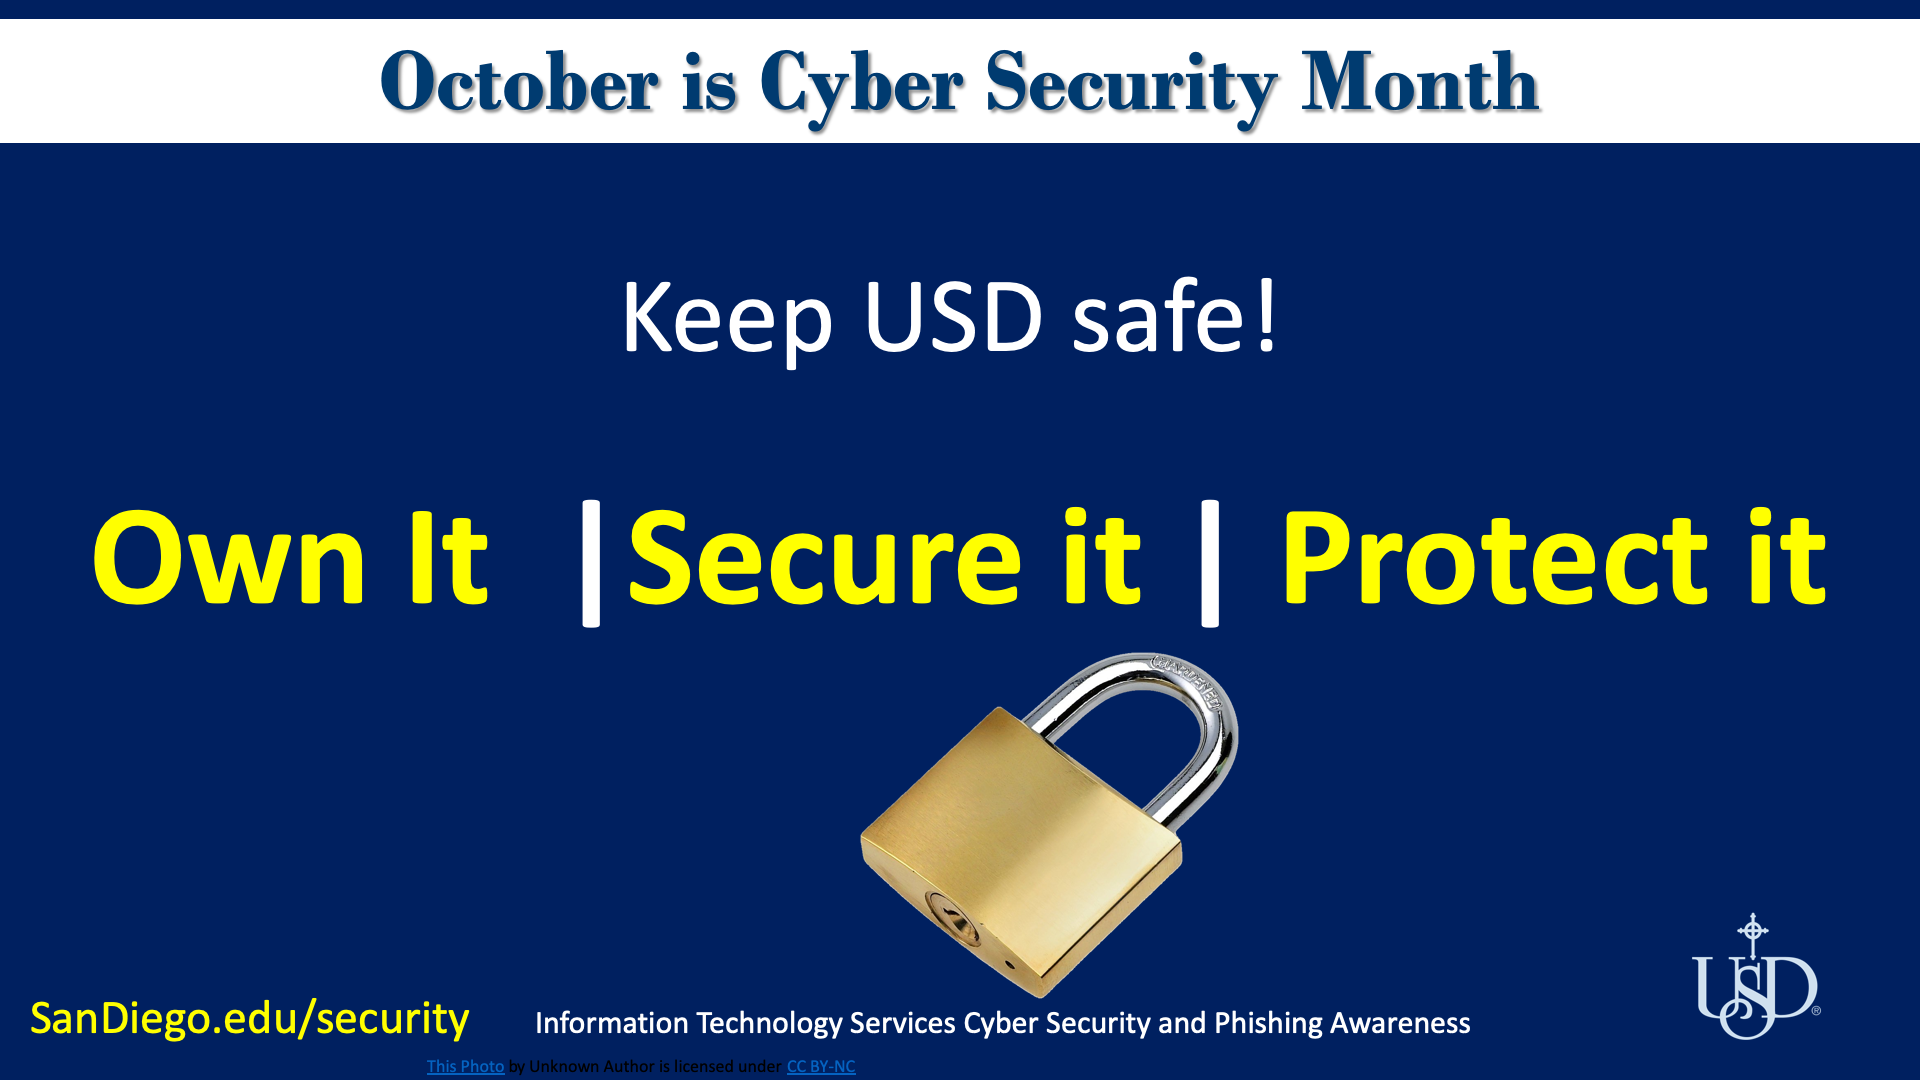 blue and white photo for October Security Awareness month. Includes text on image that says October Security Awareness, USD and refers to a URL www.sandiego.edu/security